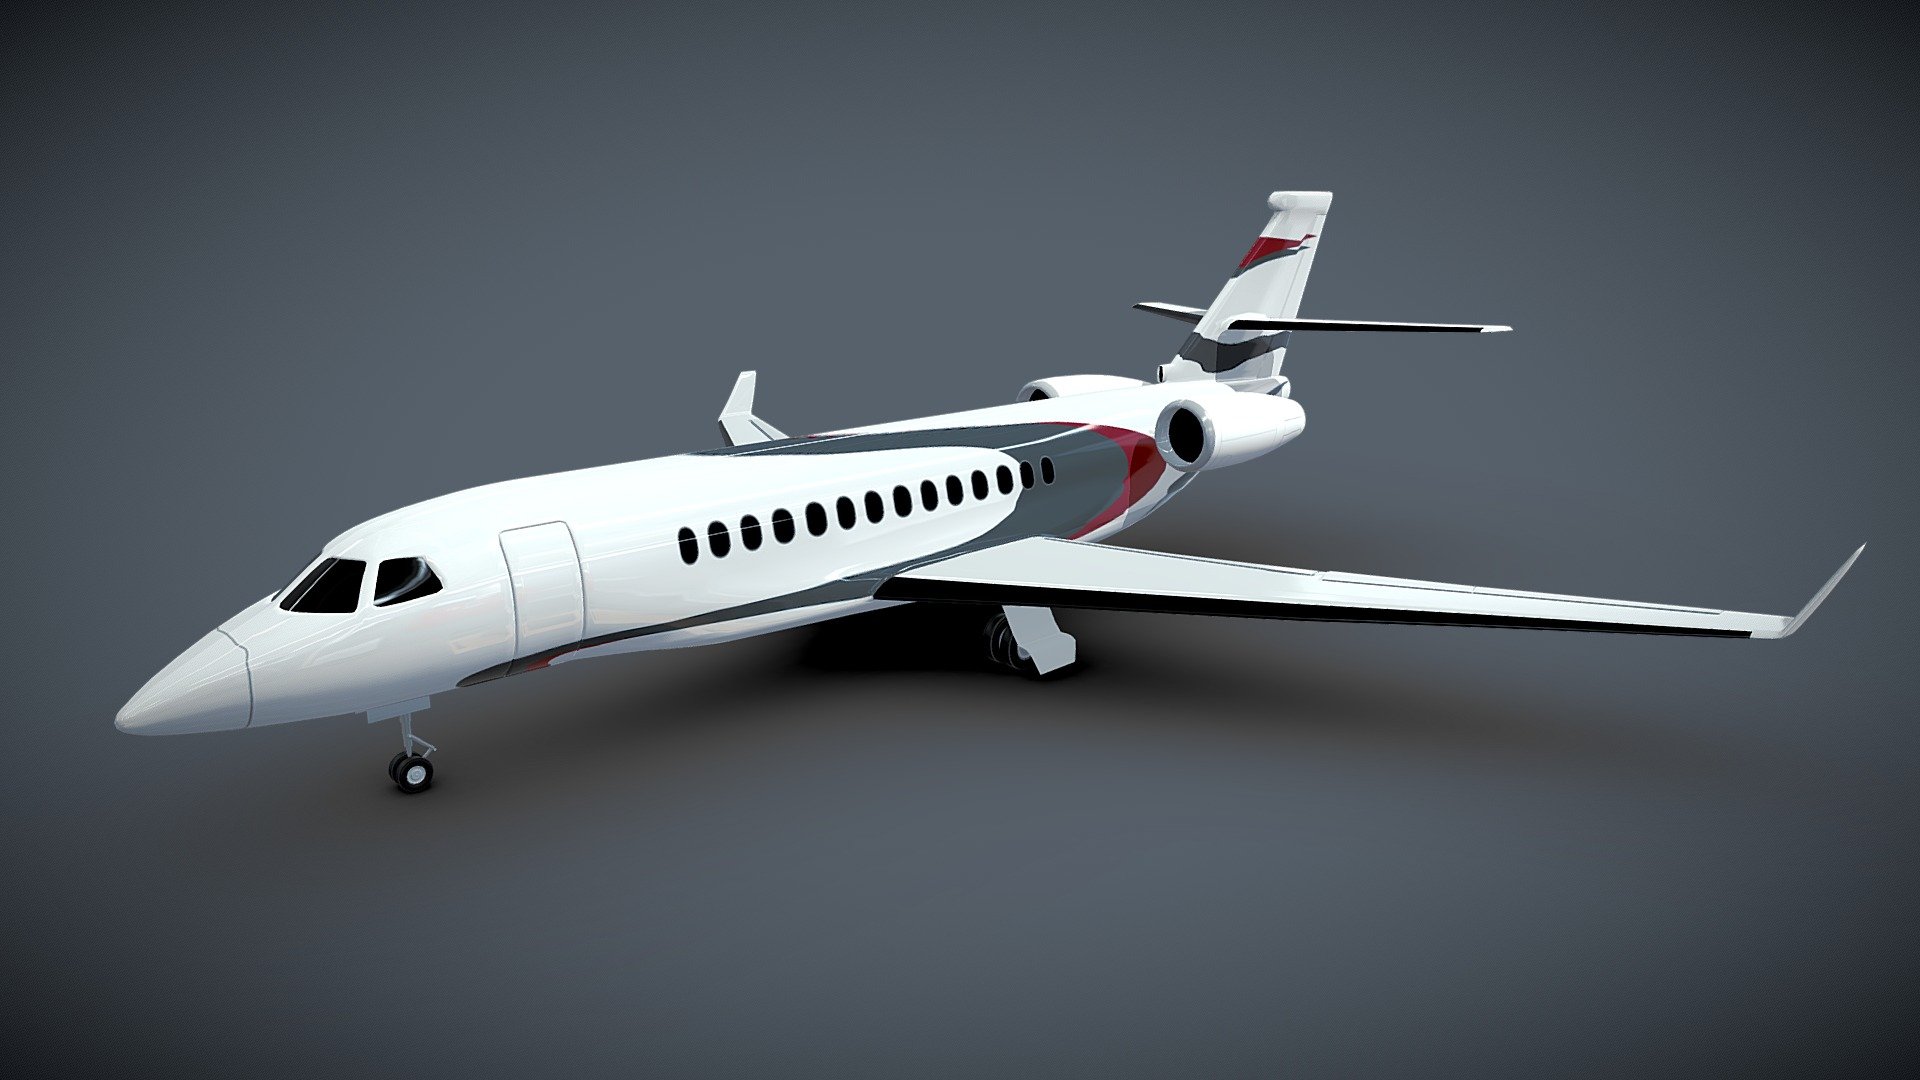 Detailed 3d model of Dassault Falcon 5x created with blender3d 2.72 version.Rendering images were created with blender internal render,settings included with blender file.There are 2 png textures one for fuselage with windows and color graphics.Texture is 2050x2050png pixels,until for engines it is 1024x1024png pixels.There are 8 NGONS in my mesh.Wheels and other parts are parented to main object .Elevators for wings not rigged.There are some stretchings on the bottom of the mesh on texture,as you can see on my images.Images were rendered with subdiv 2,until my 3d model was packed with subdiv 1.Enjoy my product.

obj file verts: 31279 polys:48700

Checked with GLC player - Dassault Falcon private jet - Buy Royalty Free 3D model by koleos3d 3d model